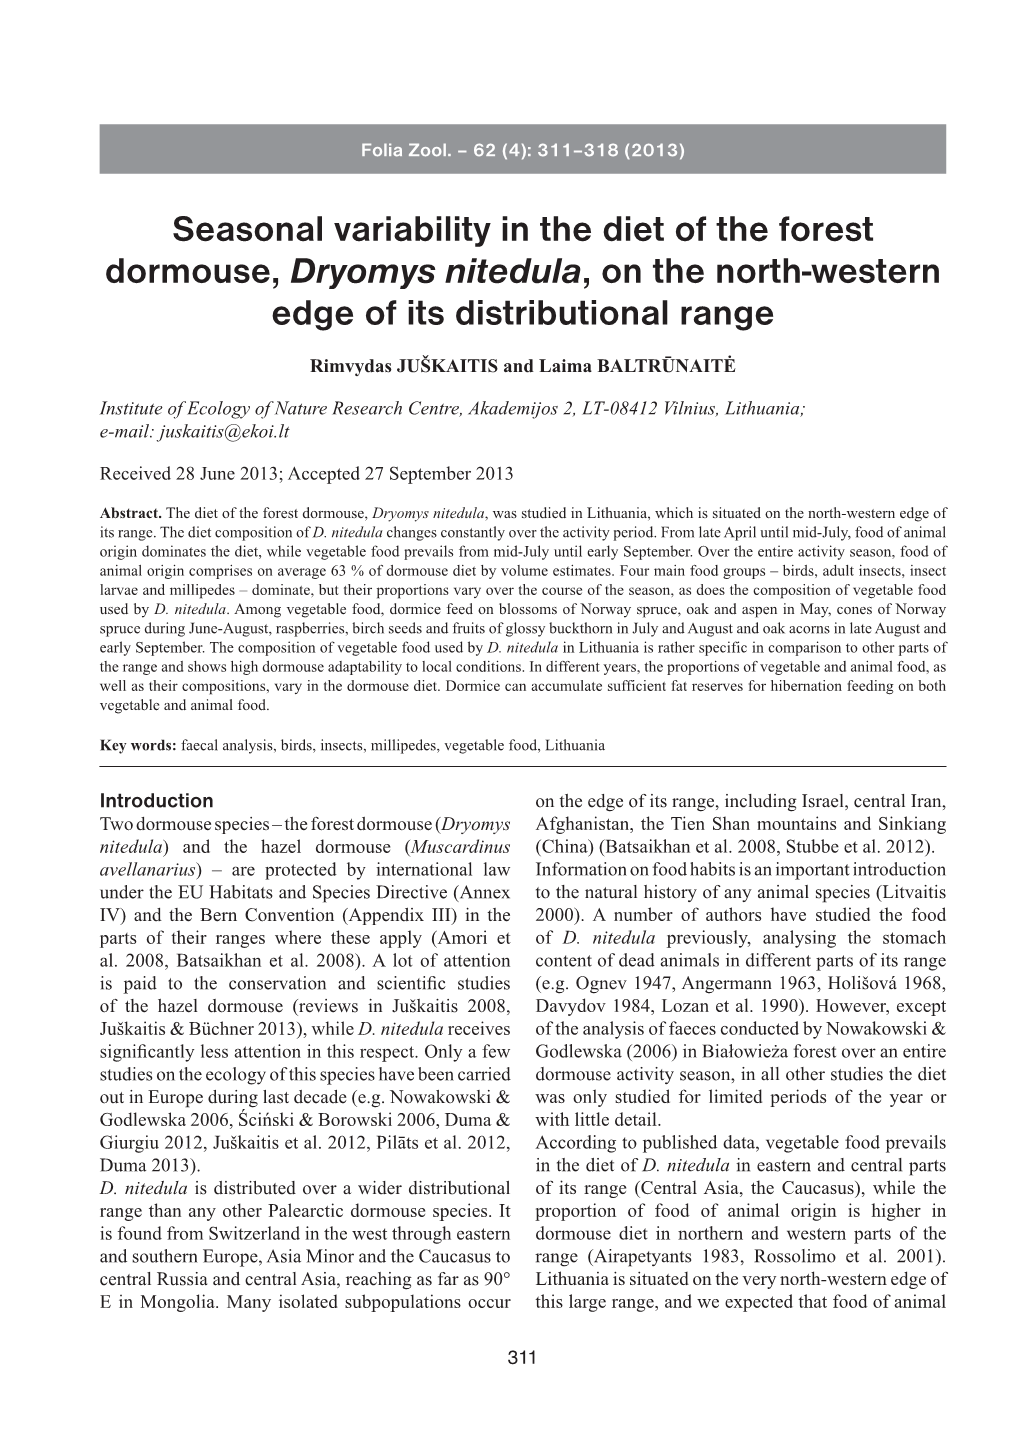 Seasonal Variability in the Diet of the Forest Dormouse, Dryomys Nitedula, on the North-Western Edge of Its Distributional Range